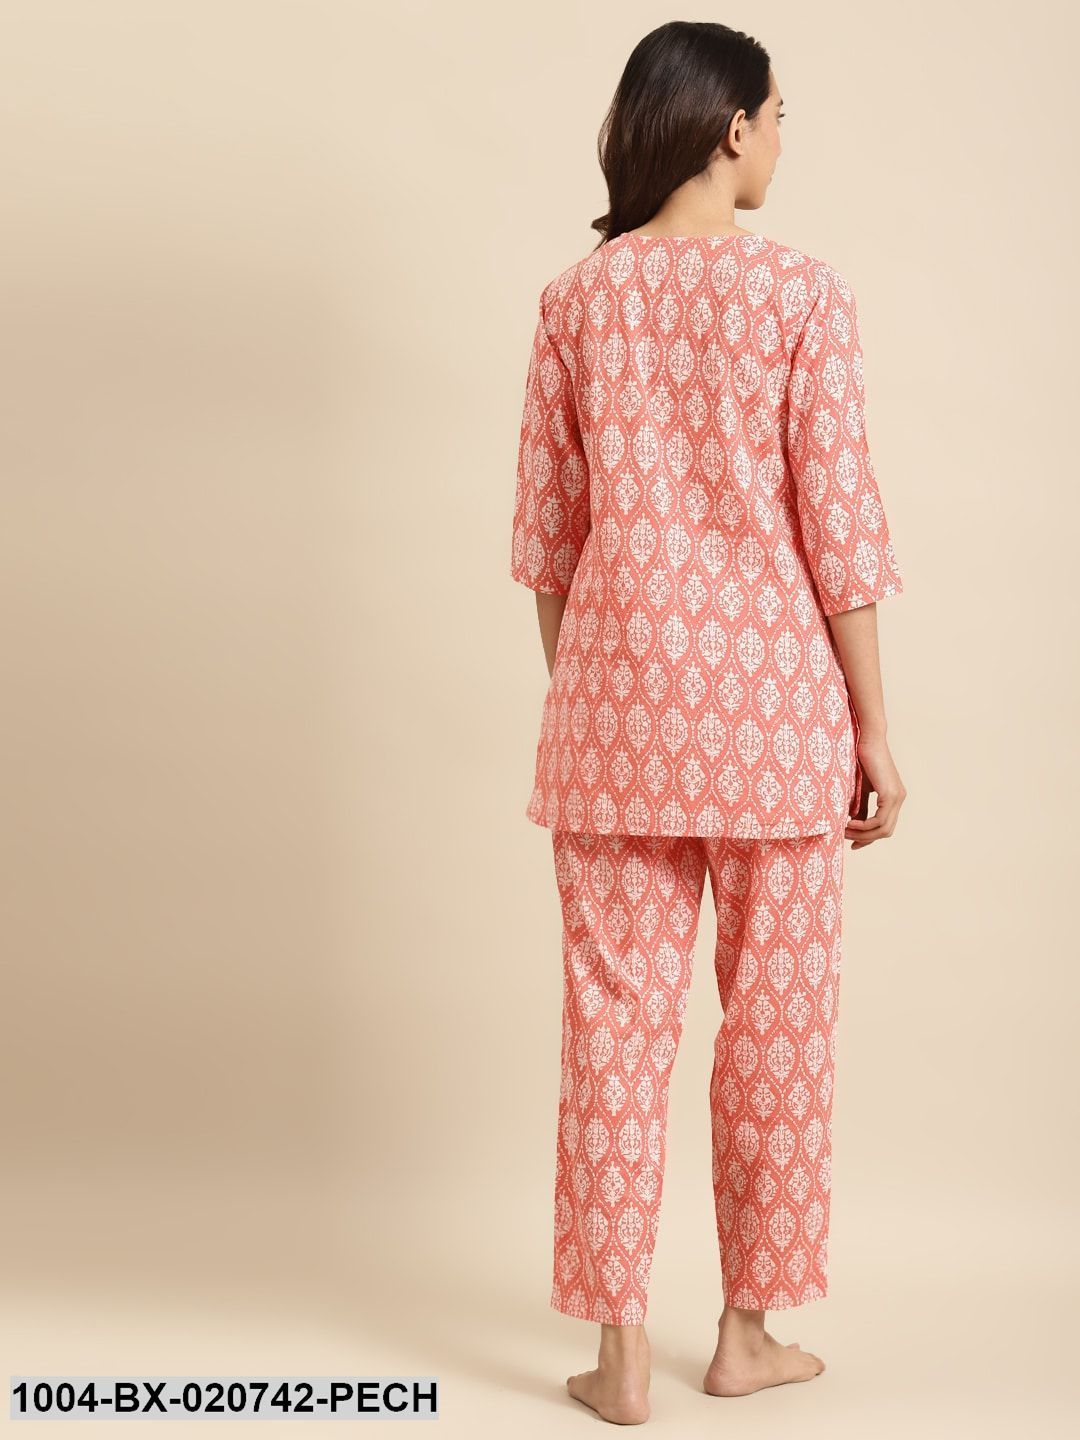 Peach-Coloured & White Pure Cotton Printed Night Suit